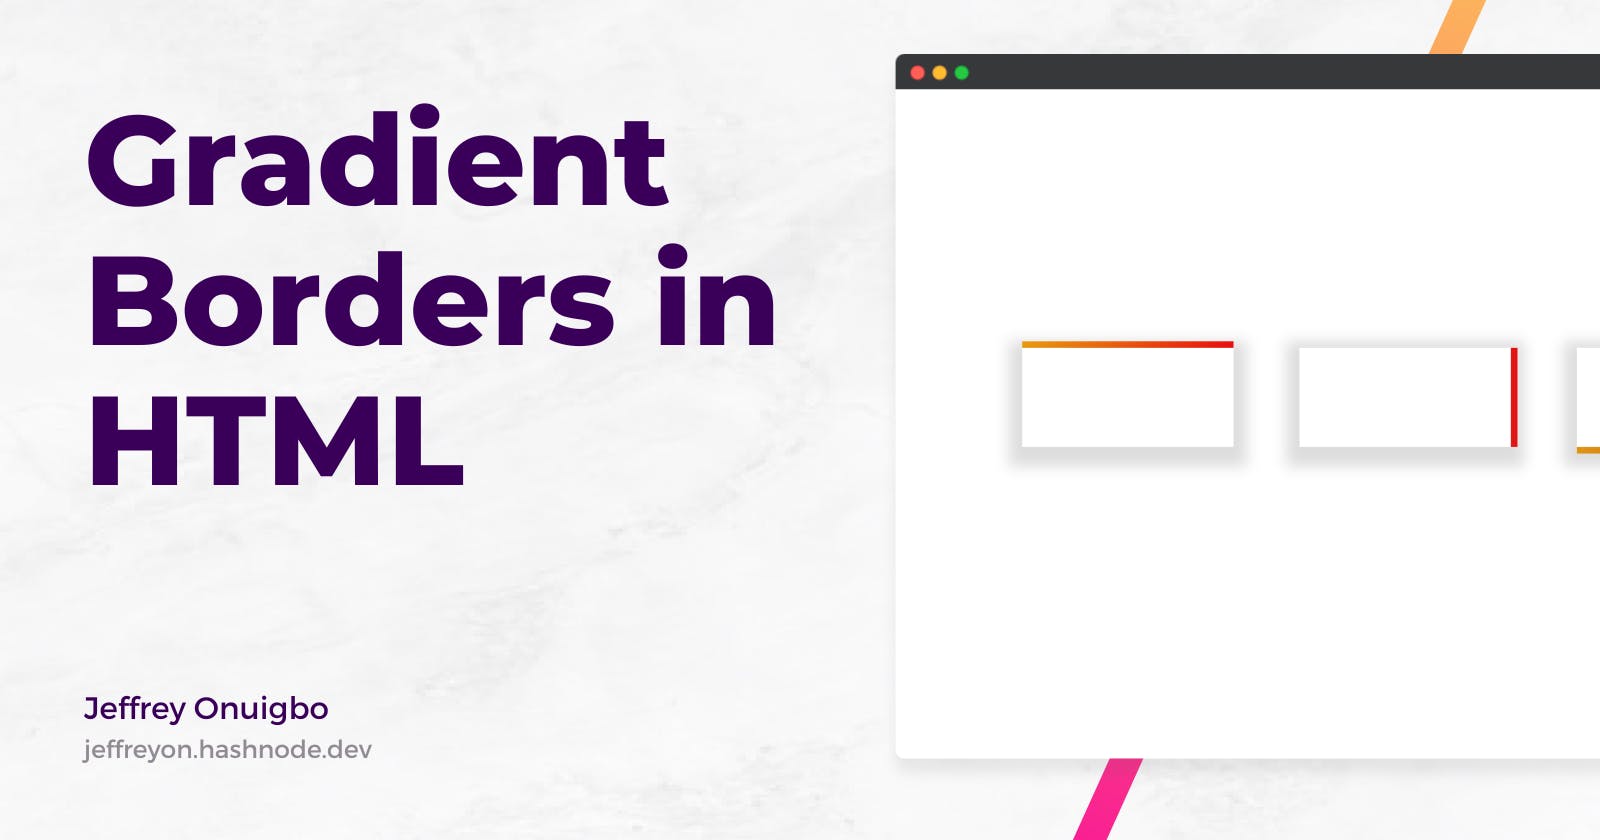 How to add gradient borders to elements in HTML